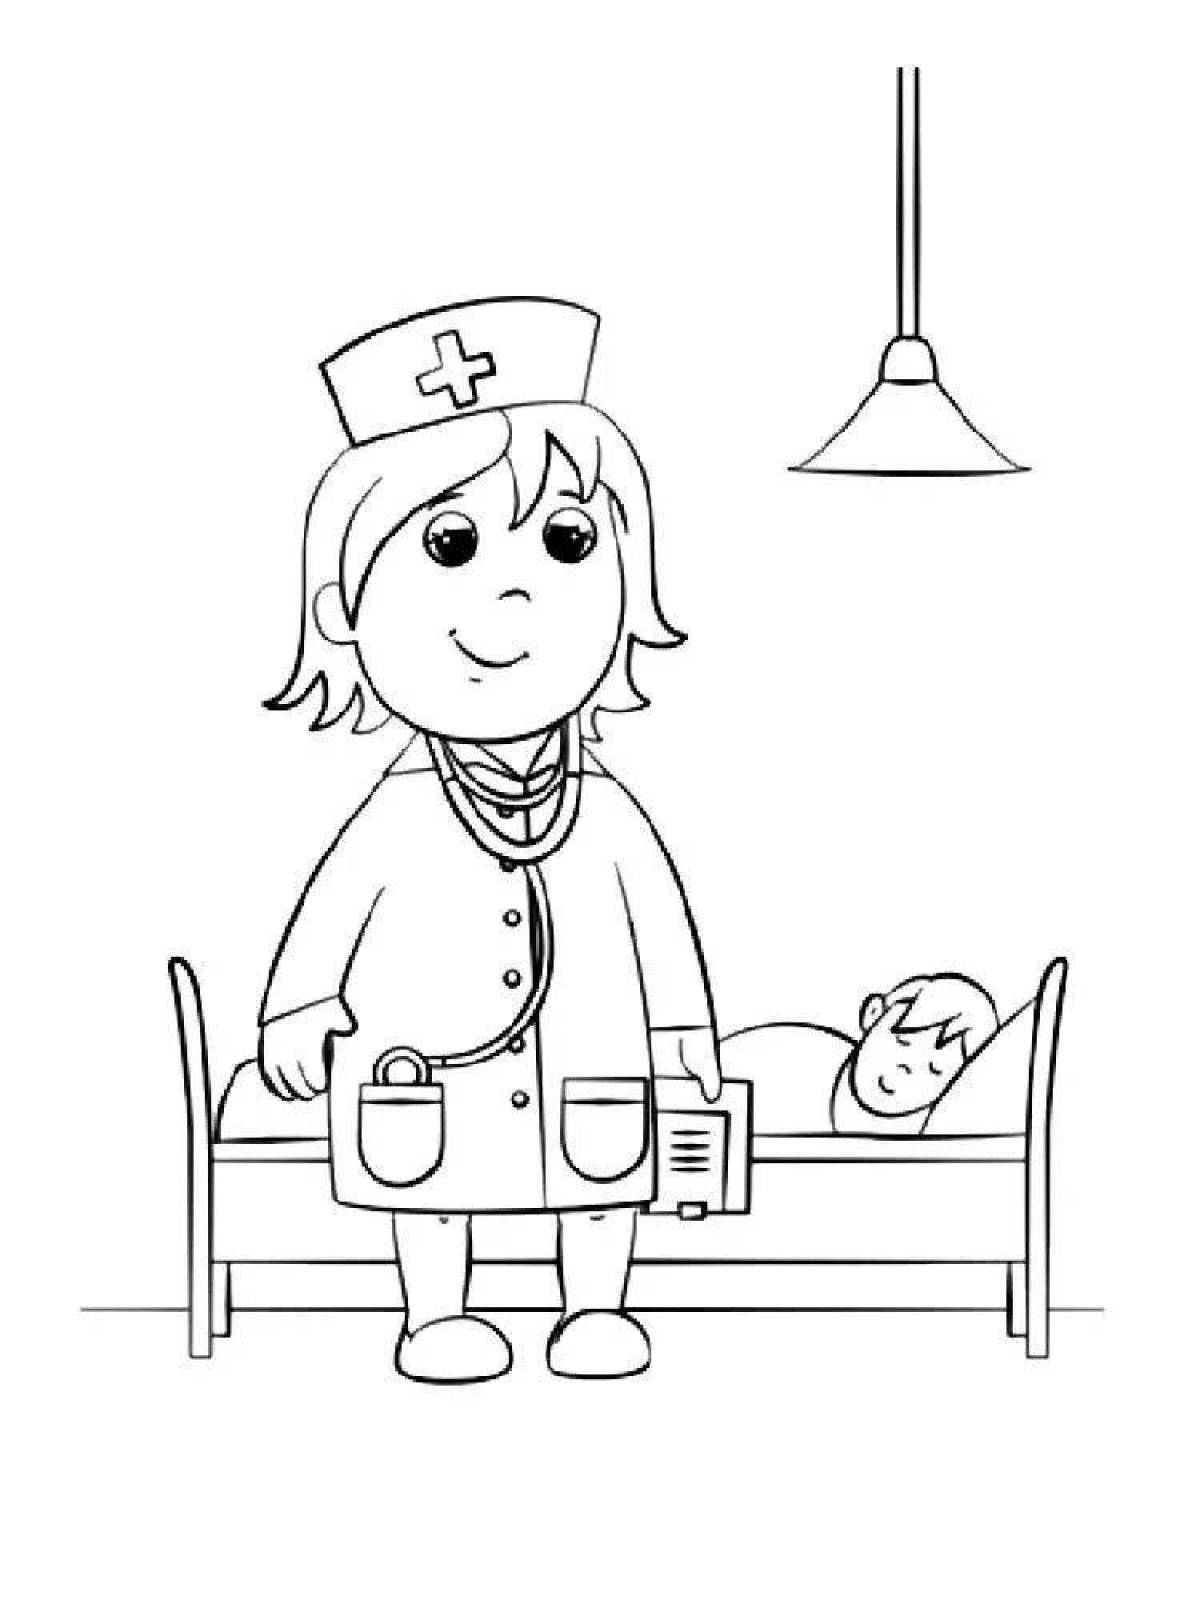 Fun doctor figure coloring page